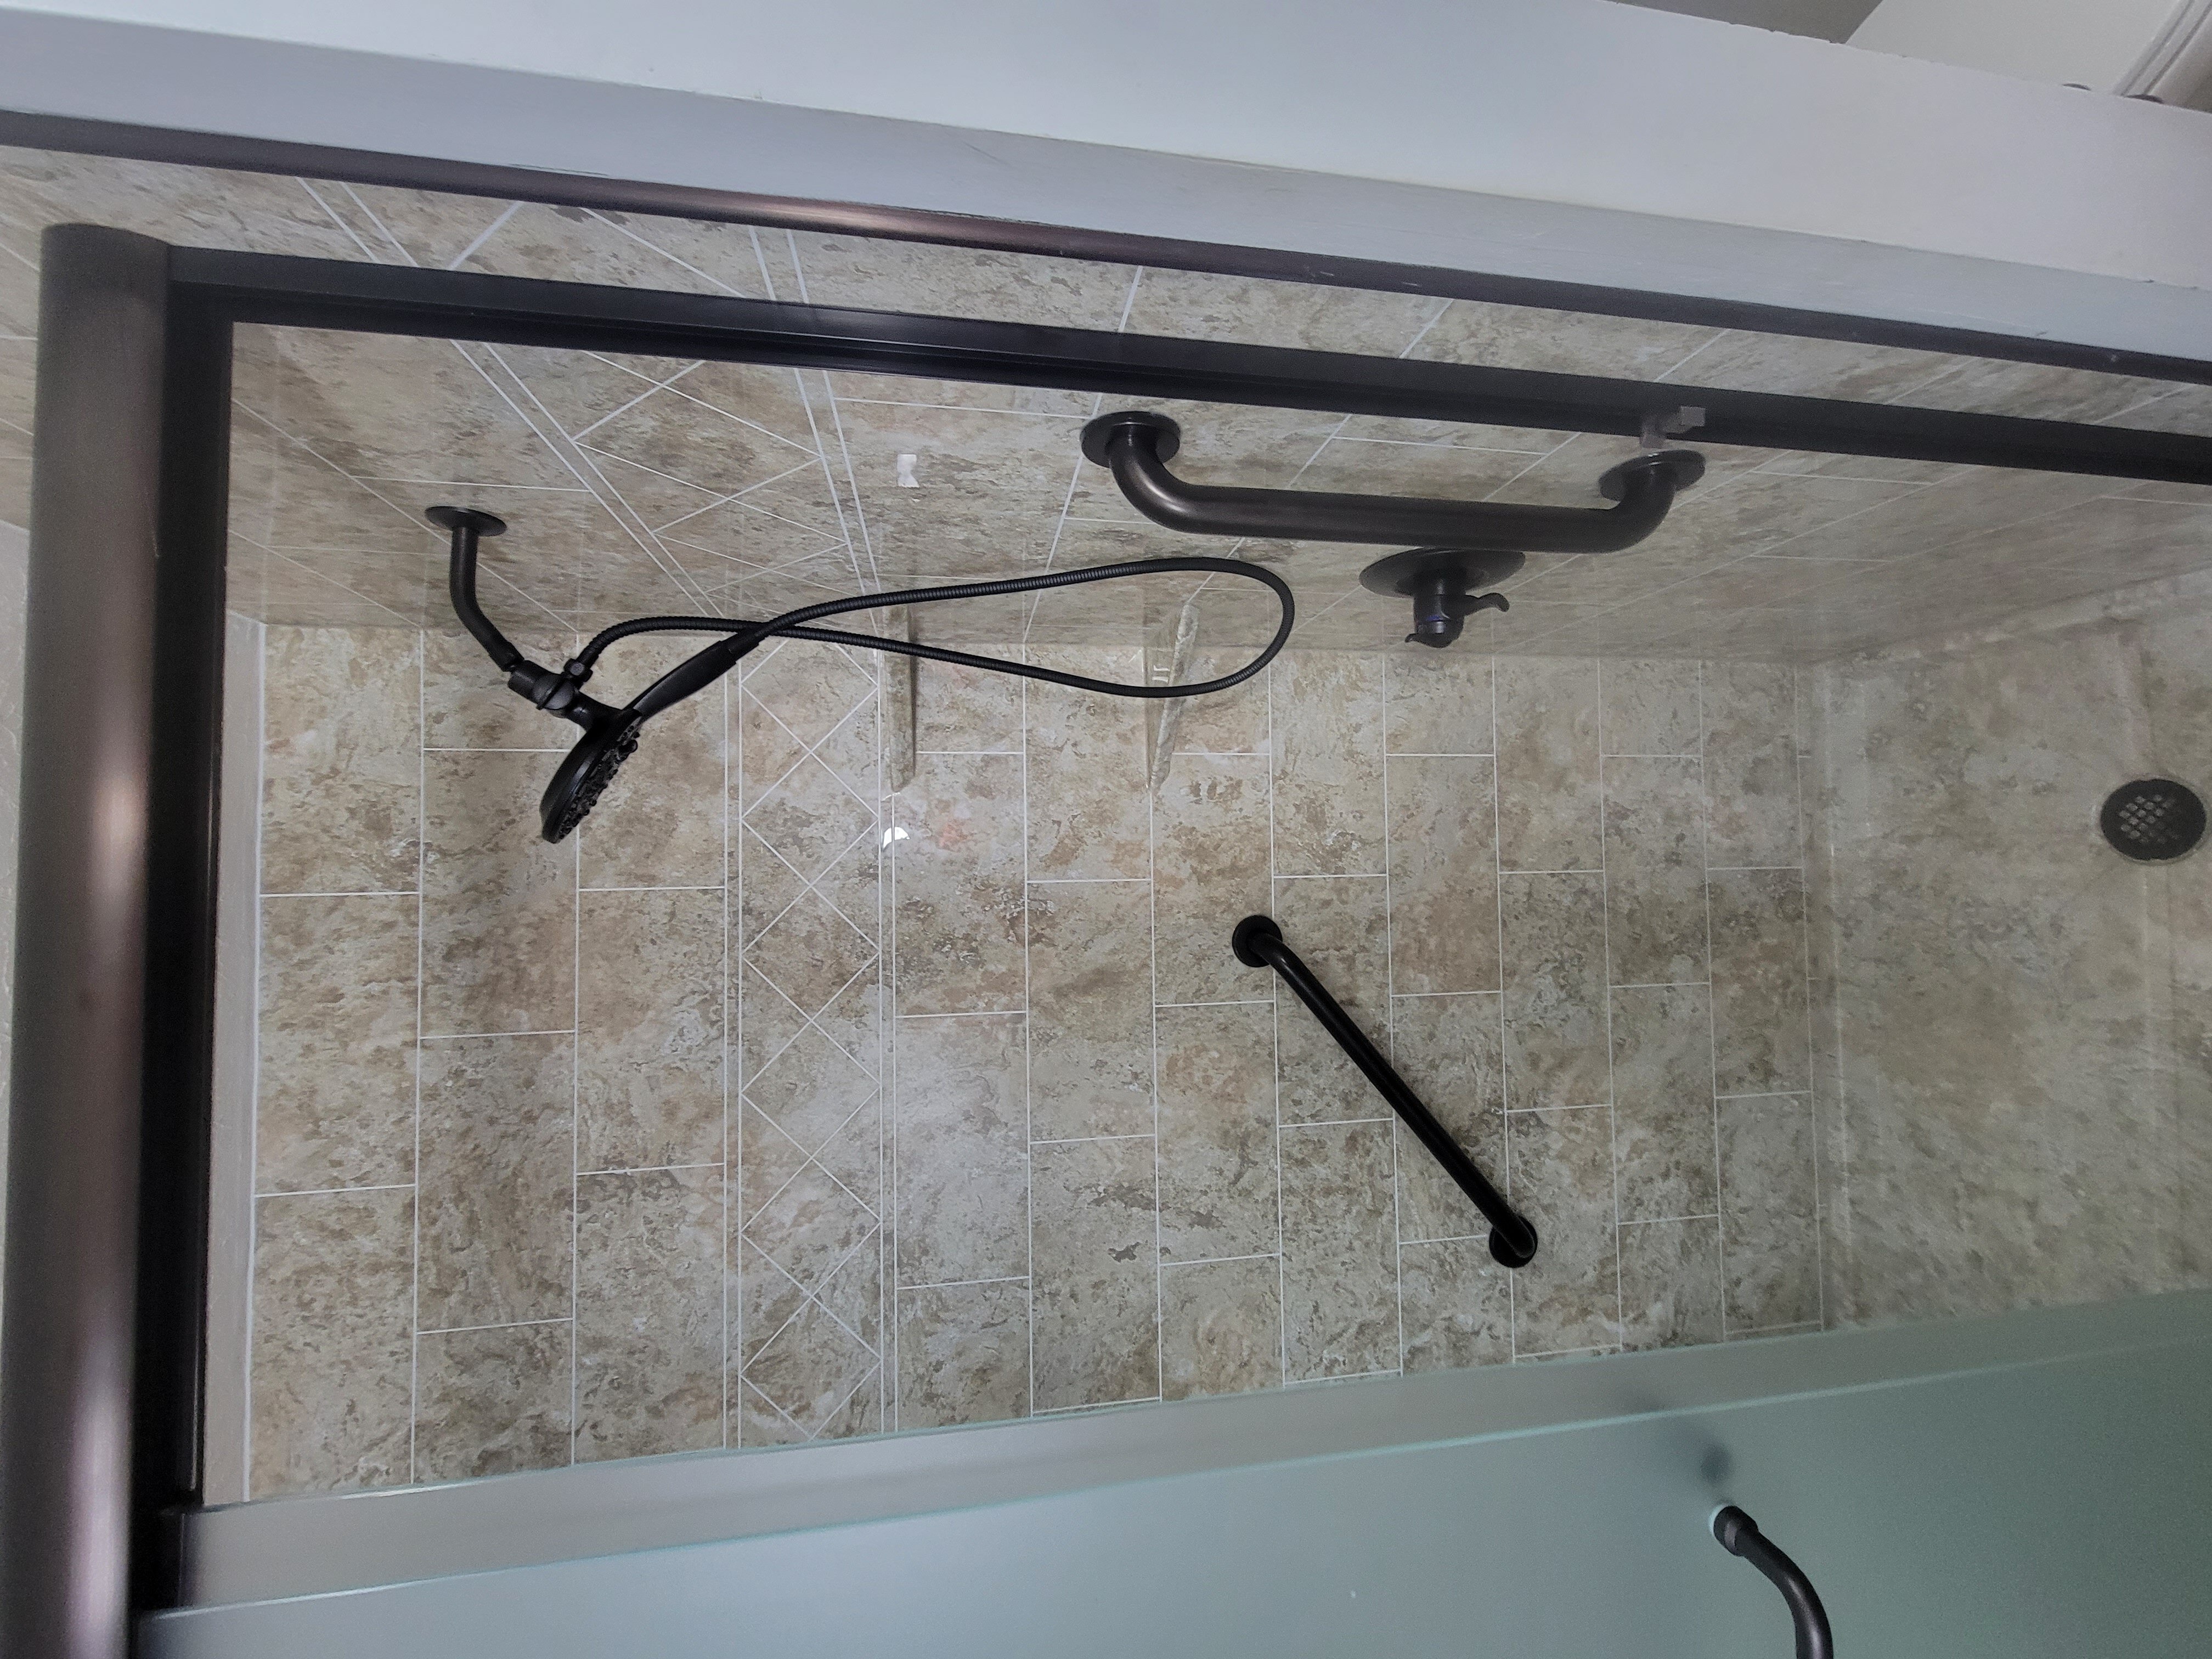 New shower with black fixtures